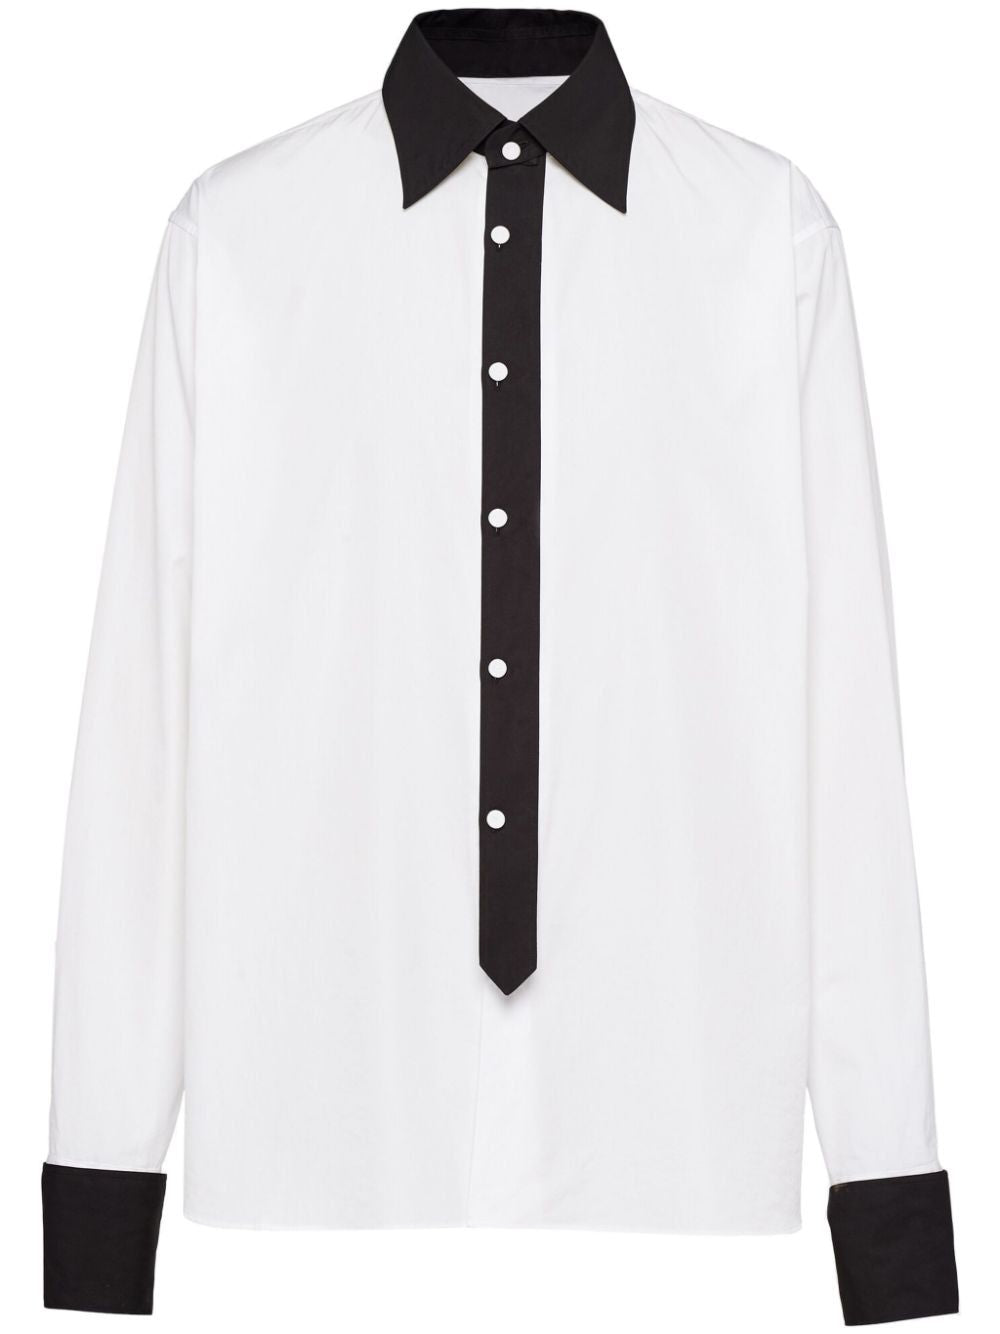 Men's White Cotton Shirt from SS24 Collection